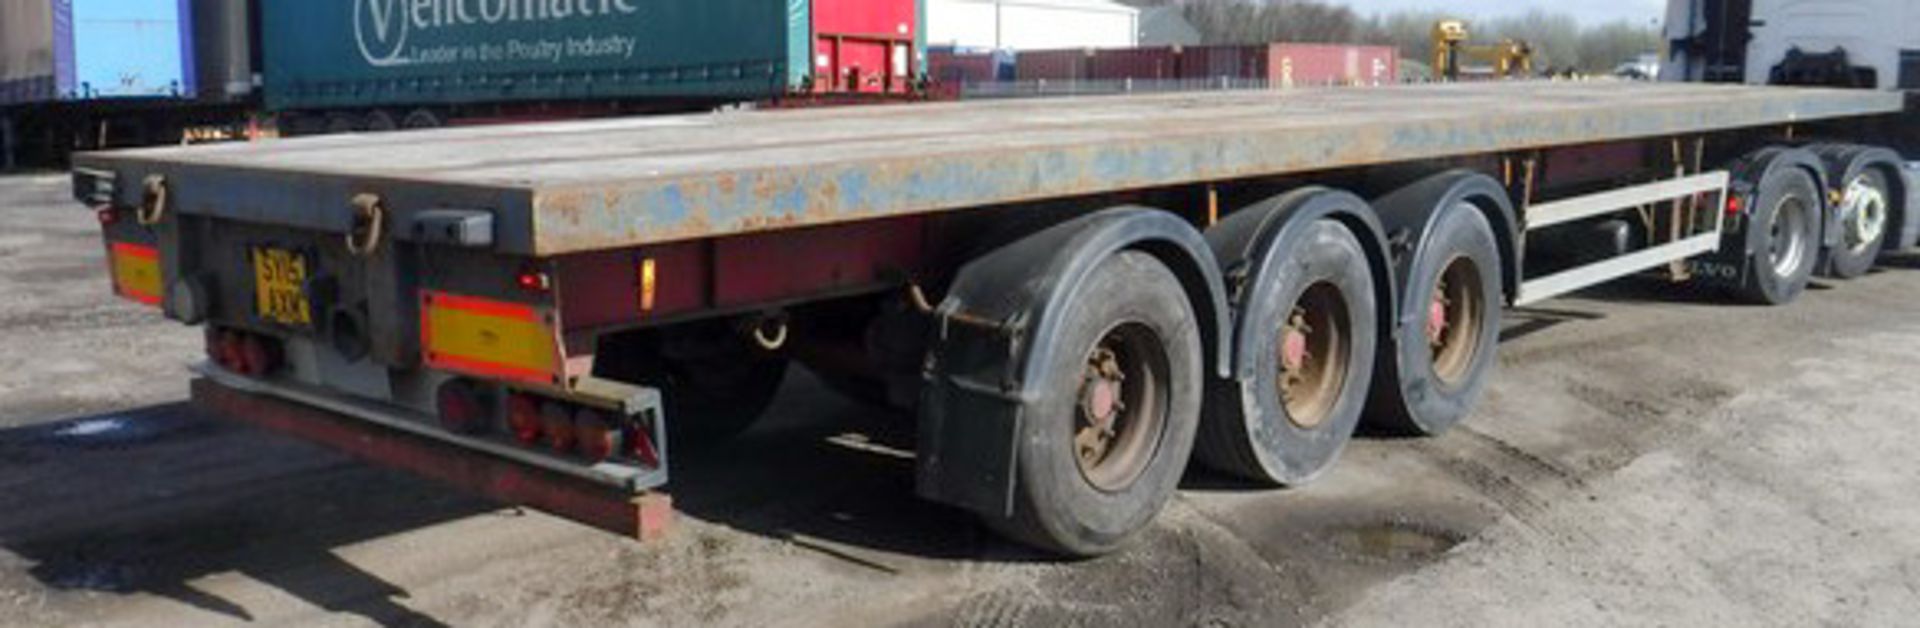 2004 MONTRACON FLATBED, REG C160047, ID 22187, 3 AXLES, MOT UNTIL NOVEMBER 2018 NO DOC IN OFFICE - Image 4 of 9